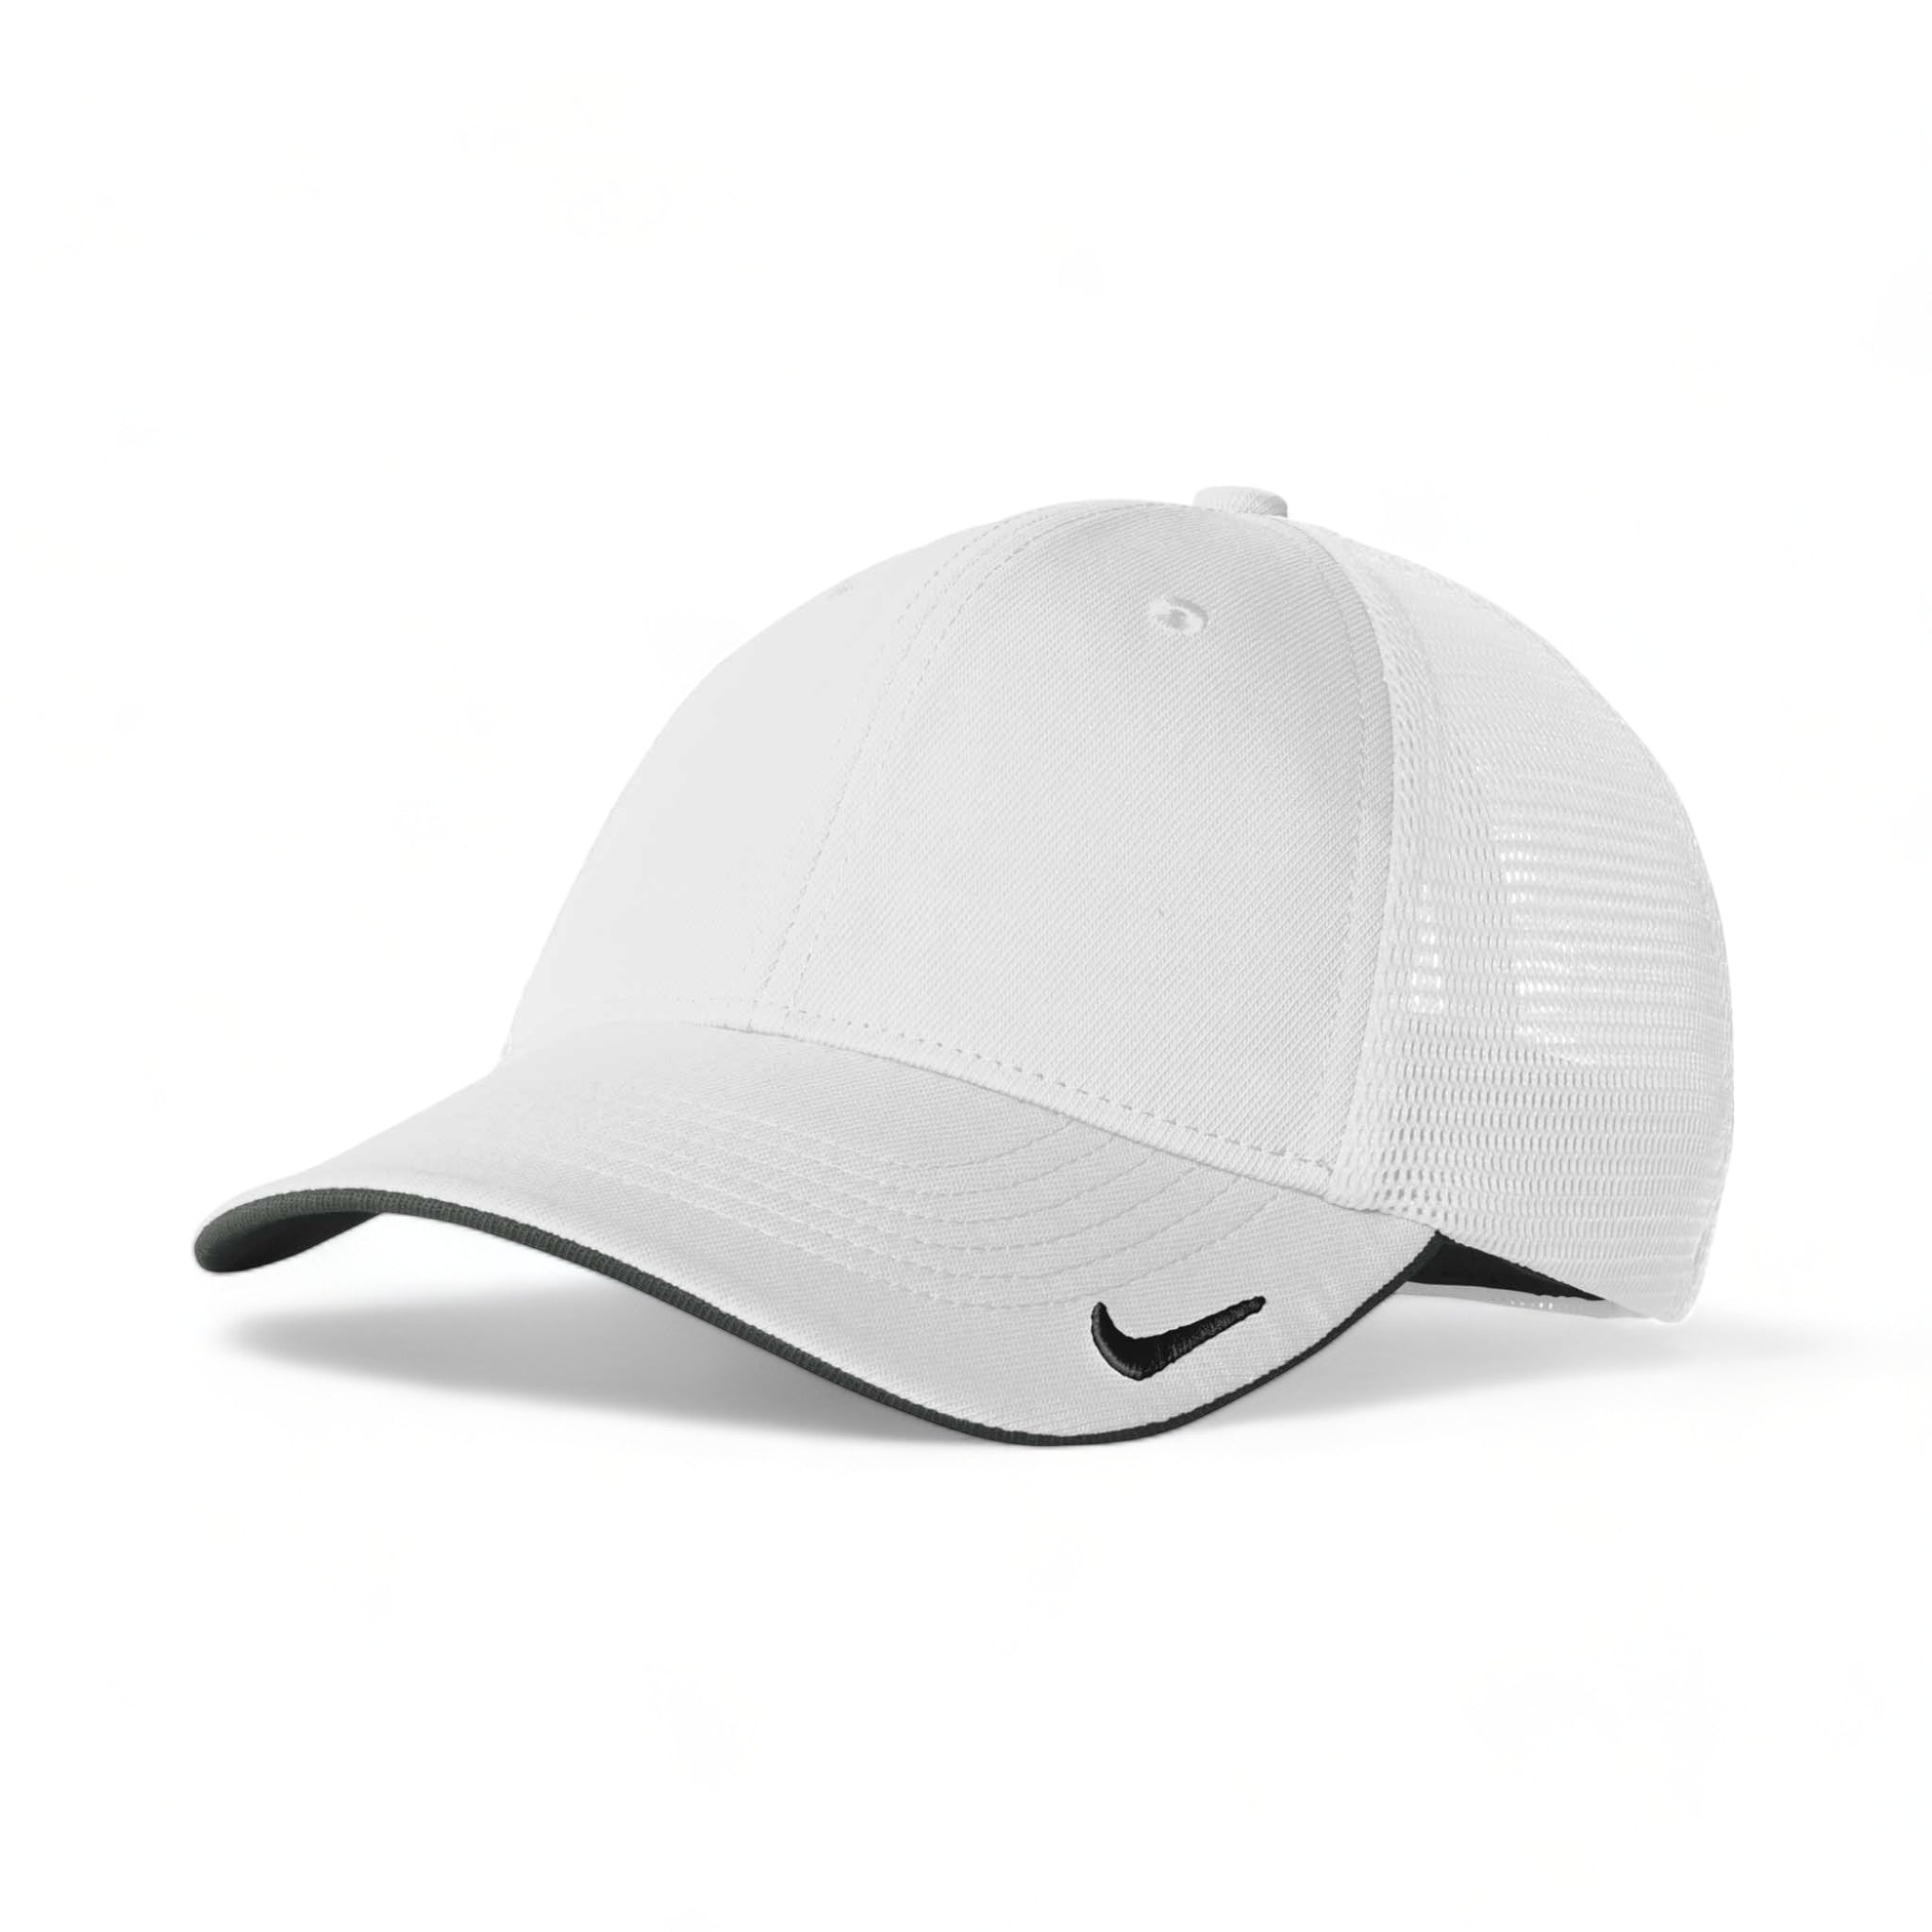 Side view of Nike NKFB6448 custom hat in white and white